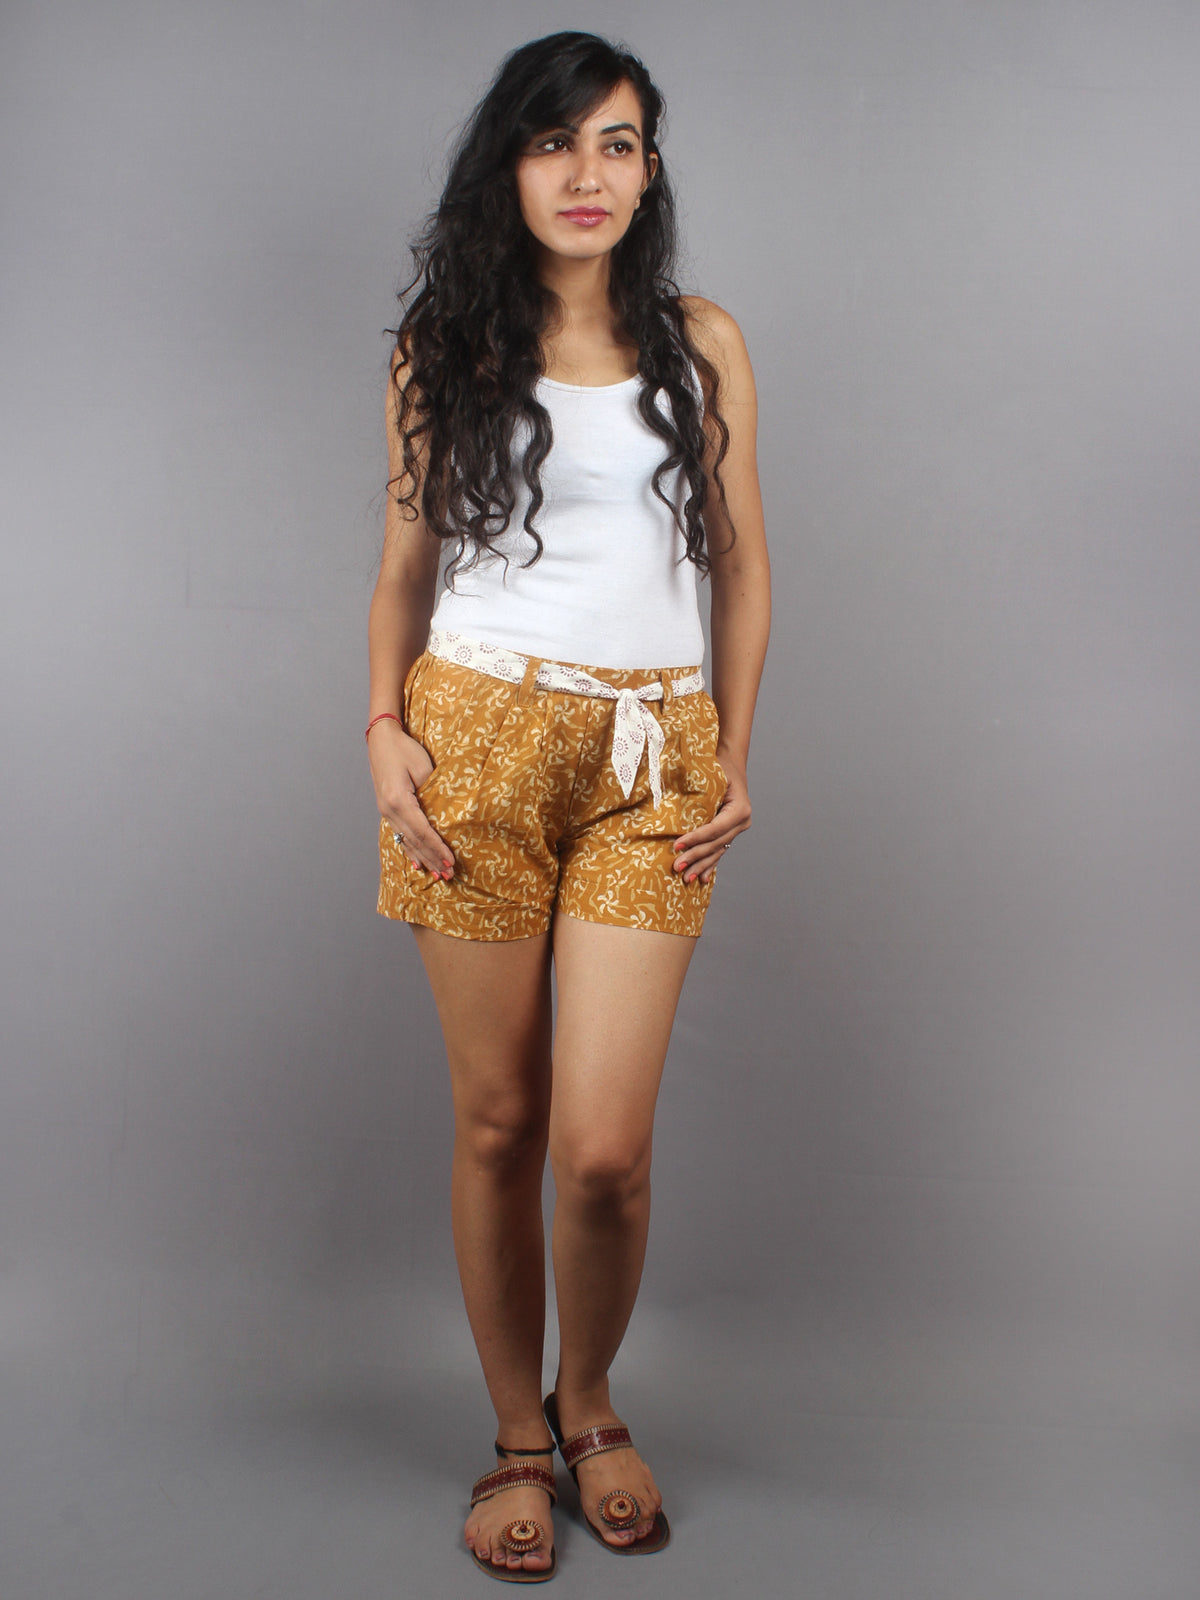 Mustard Hand Block Printed Shorts With Belt -S5296005